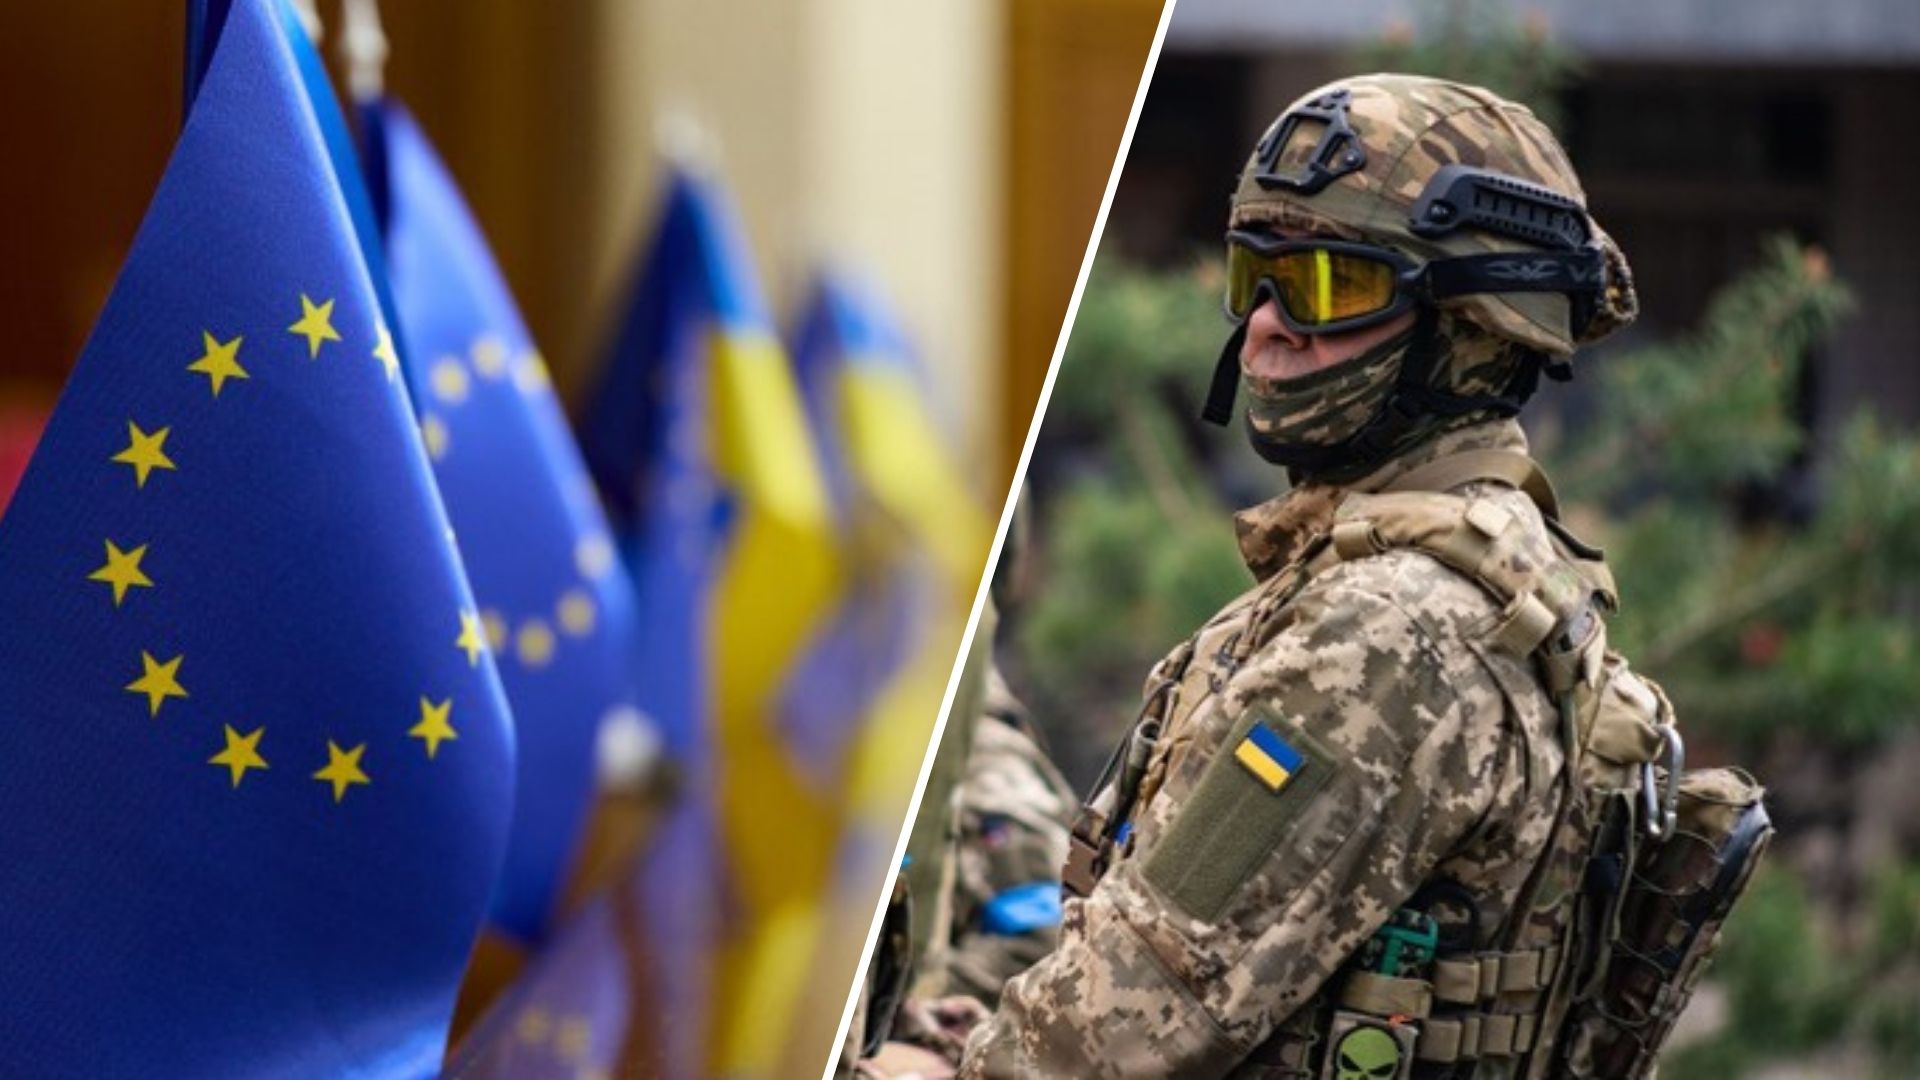 The European Commission and EU High Representative Josep Borrell presented the first European defence industry strategy at EU level, which envisages closer cooperation with Ukraine, and proposed an ambitious set of new measures to support the competitiveness and readiness of the European defence industry.